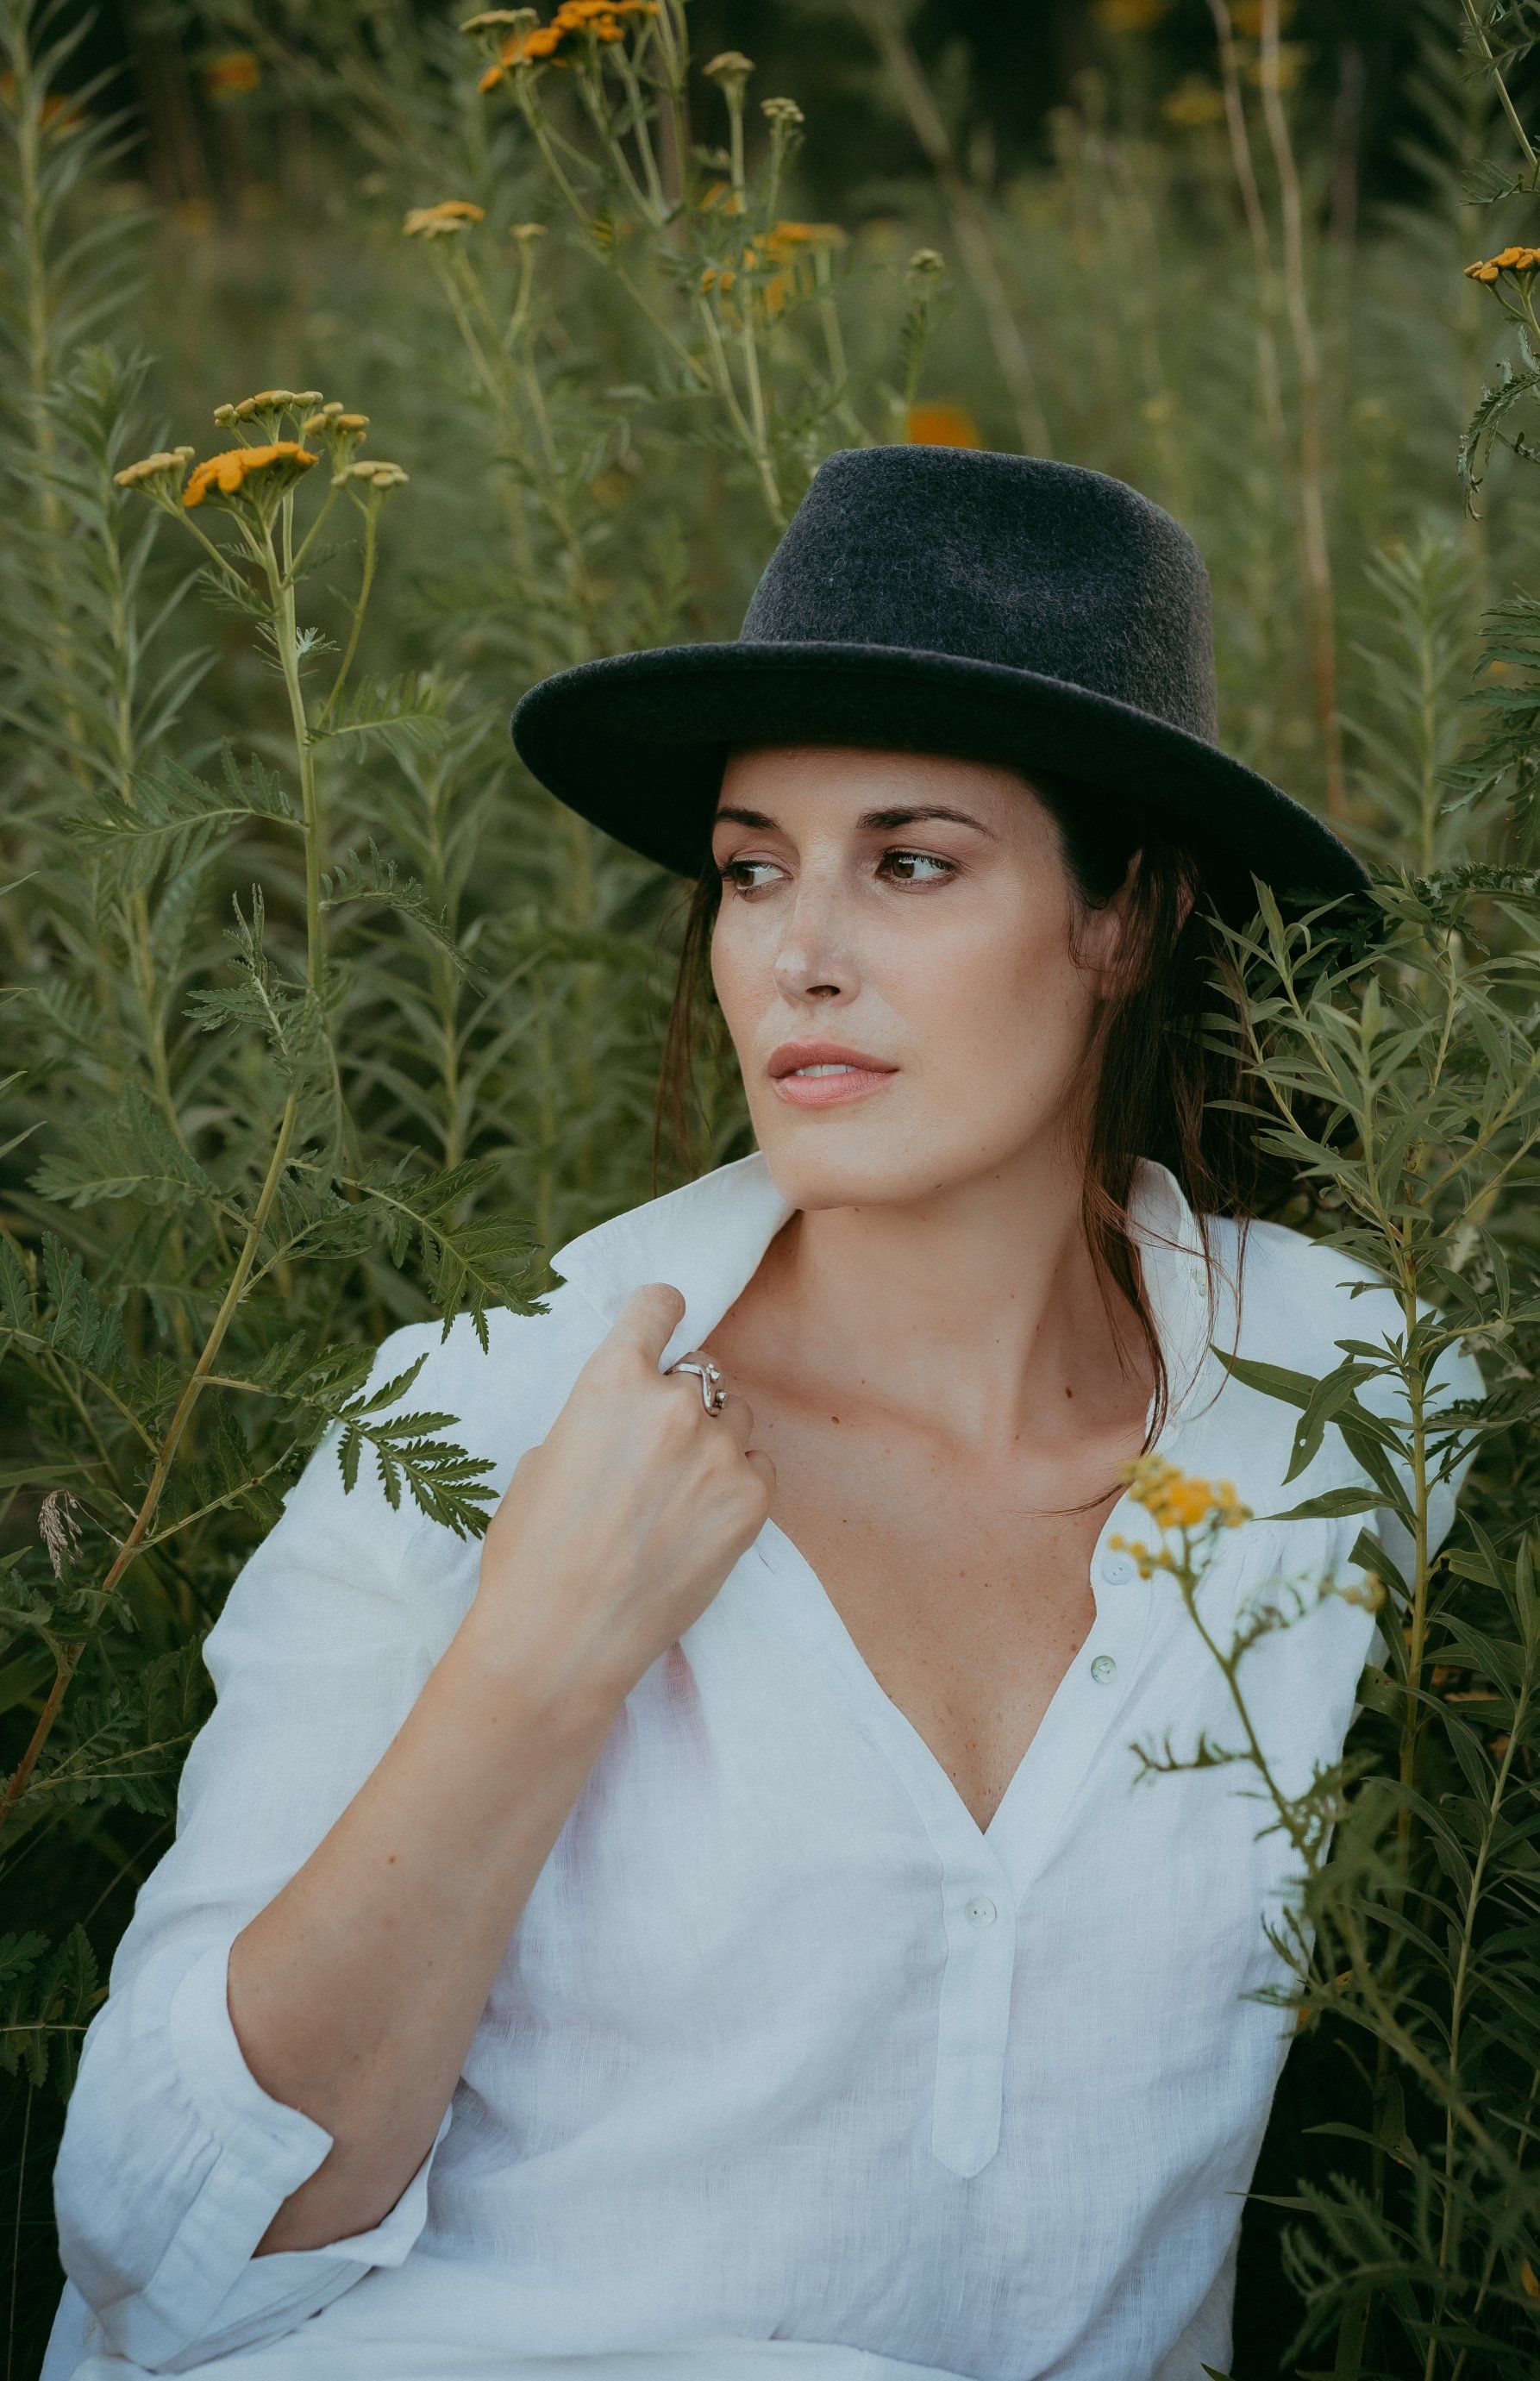 Personal branding photo of woman wearing a black hat and white blouse sitting in field of tall grasses and wild flowers